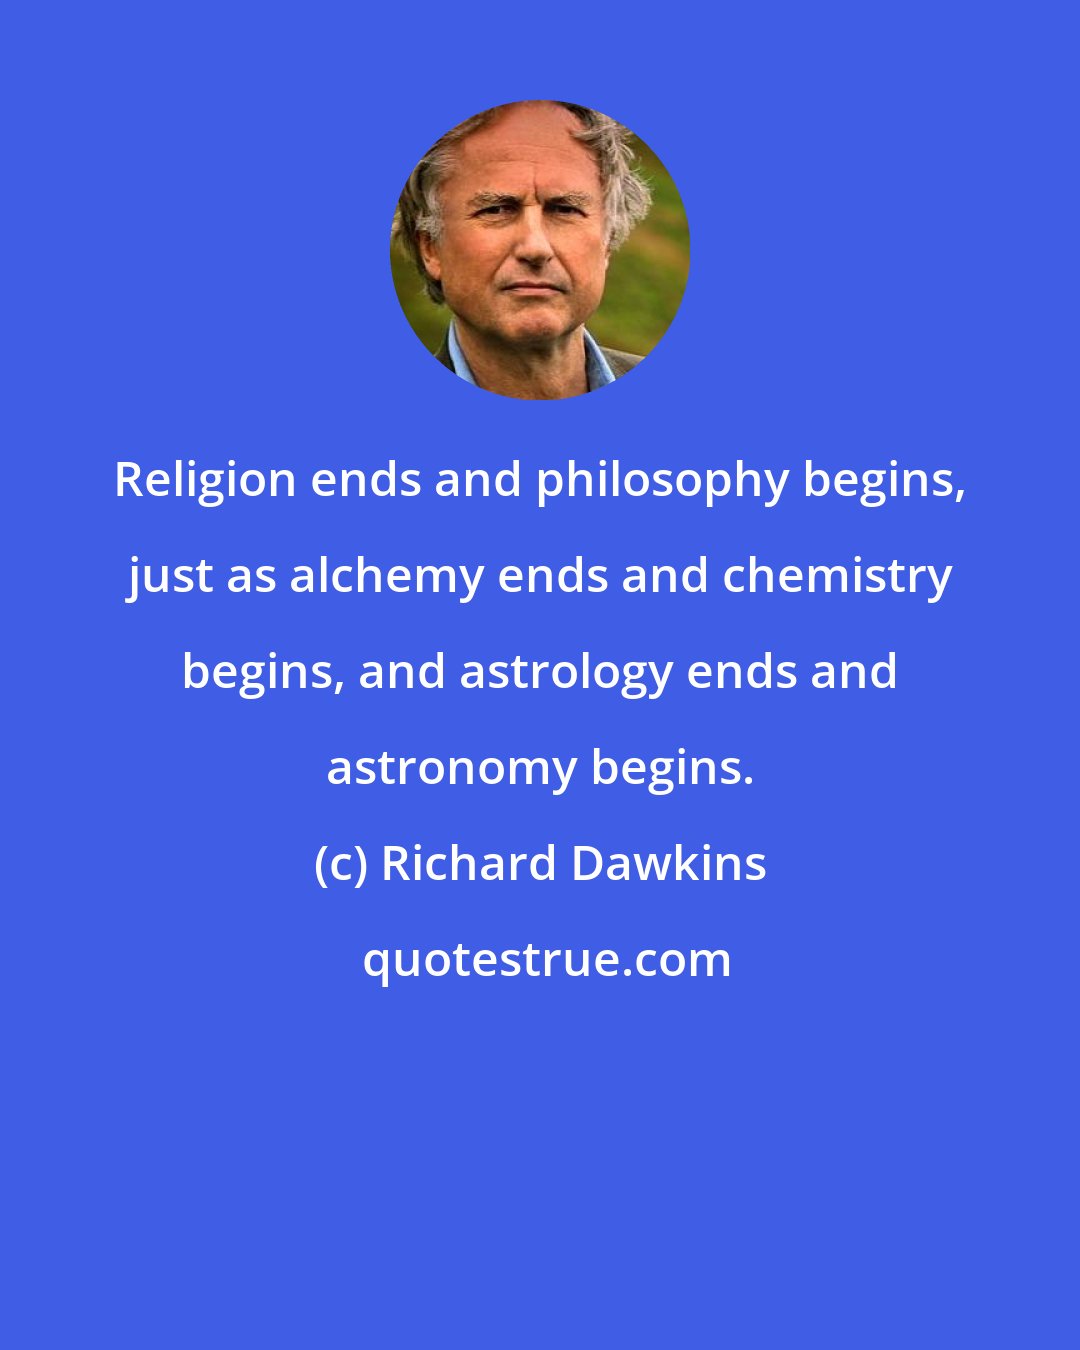 Richard Dawkins: Religion ends and philosophy begins, just as alchemy ends and chemistry begins, and astrology ends and astronomy begins.